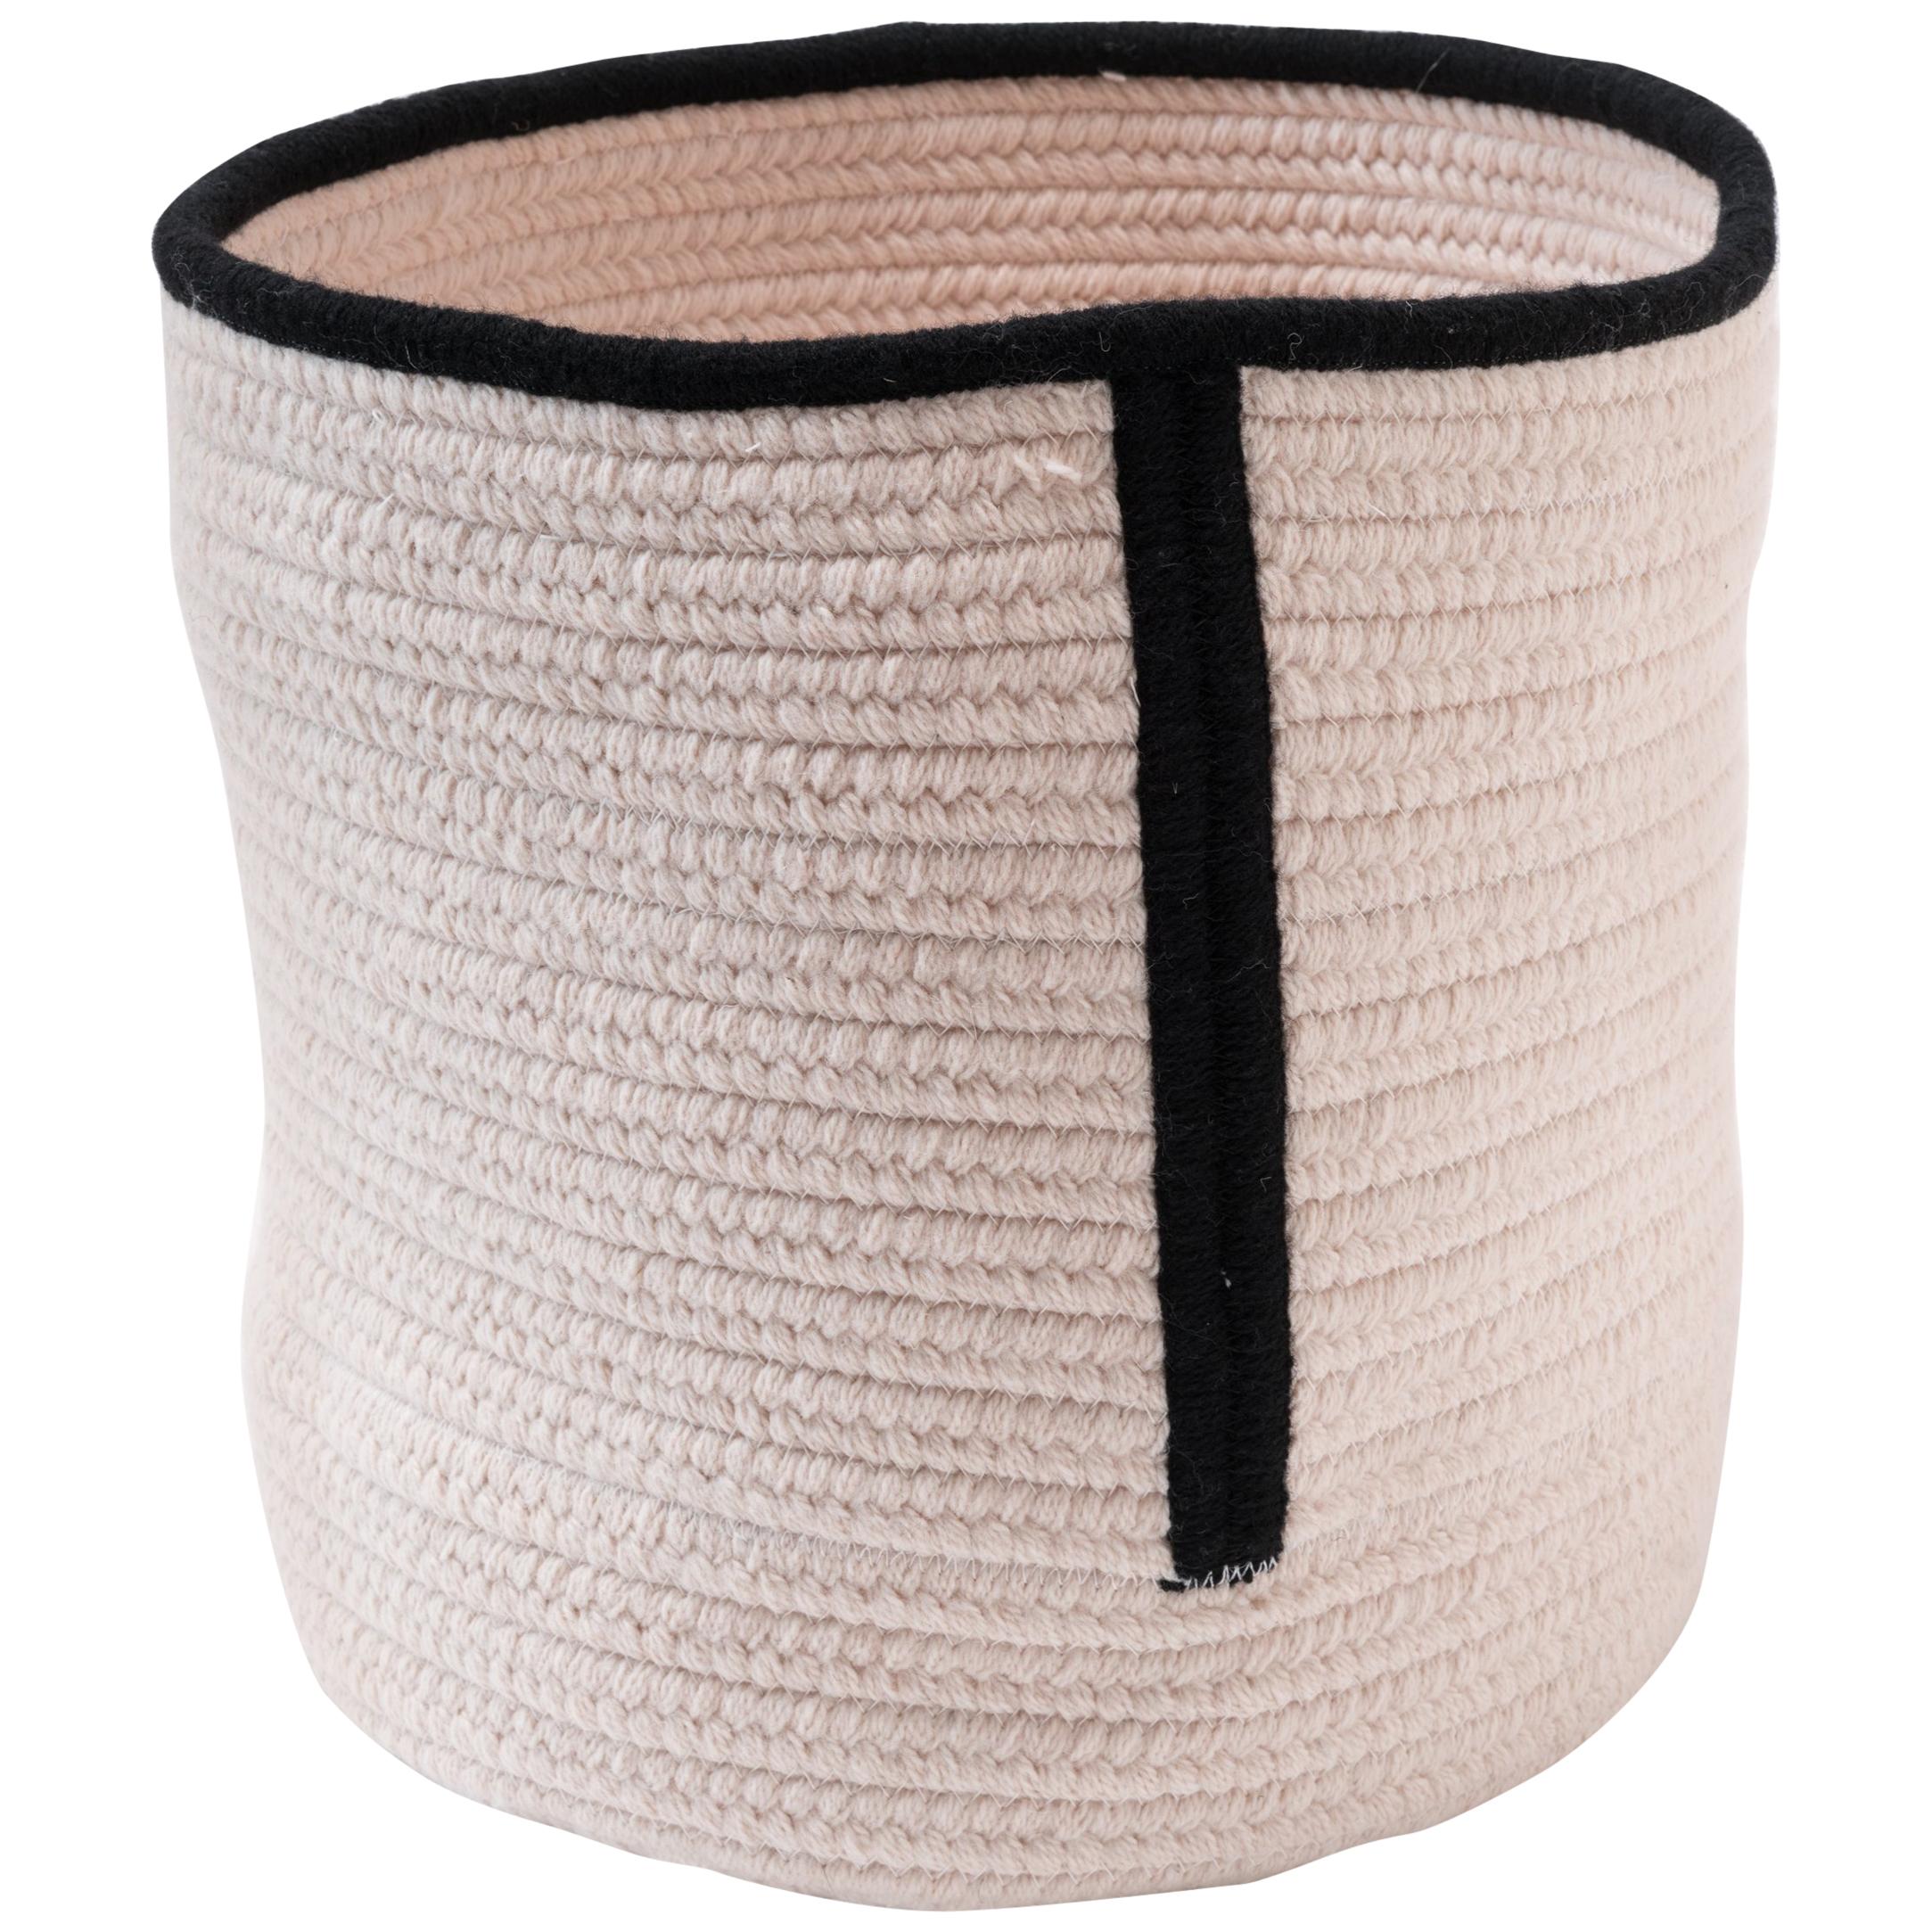 Natural Woven Wool Basket in Black White, Custom Made in the USA, Line Design For Sale